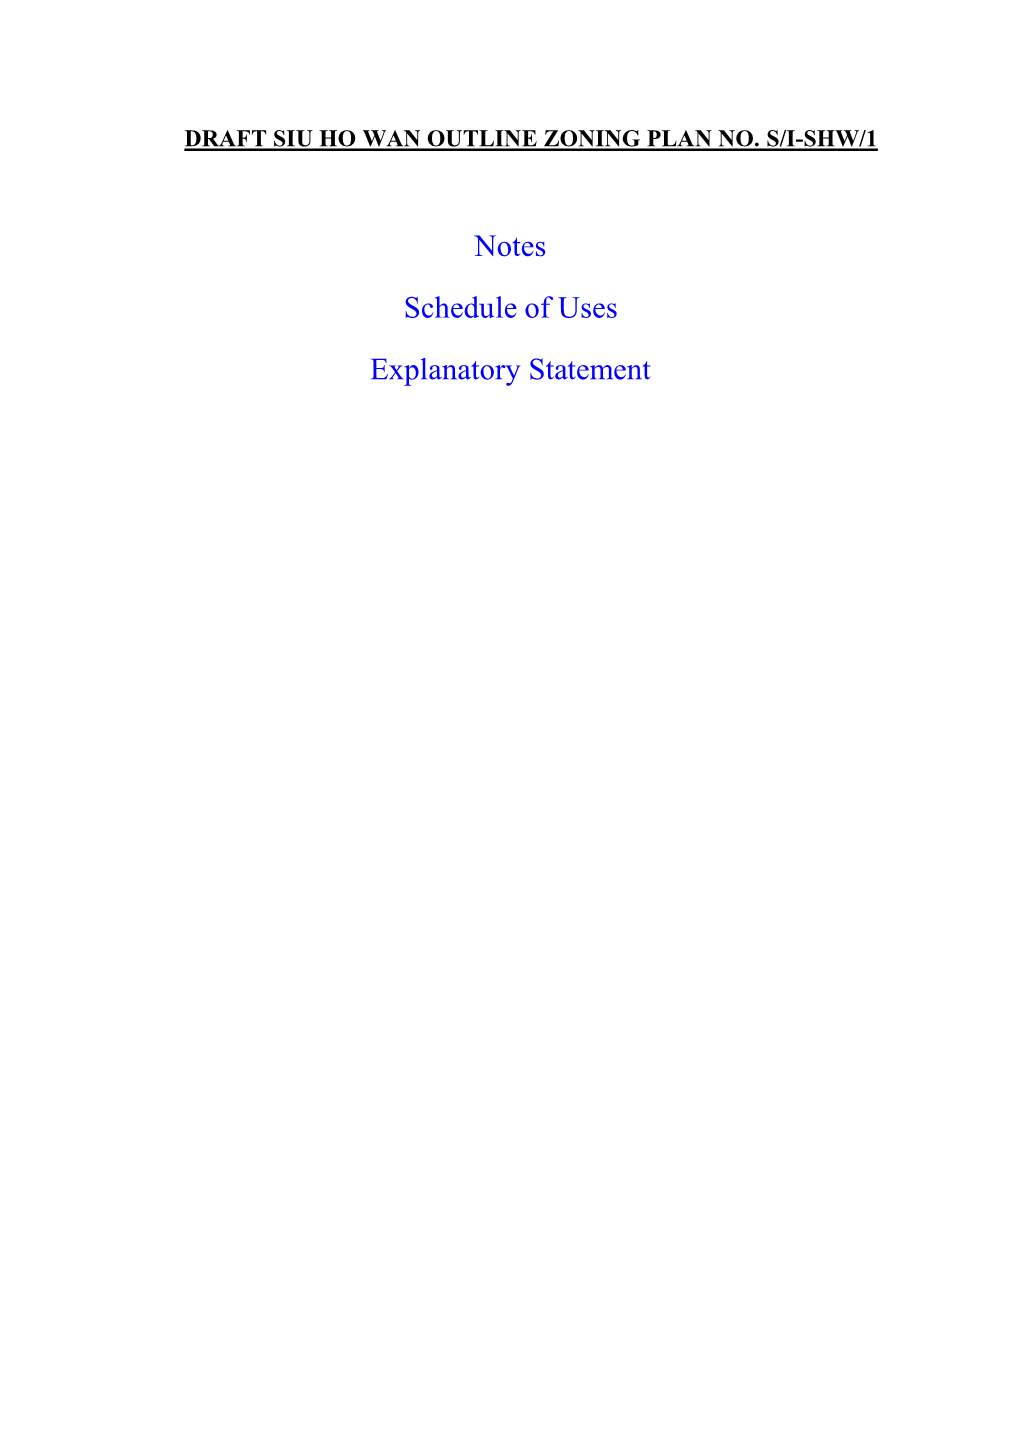 Notes Schedule of Uses Explanatory Statement